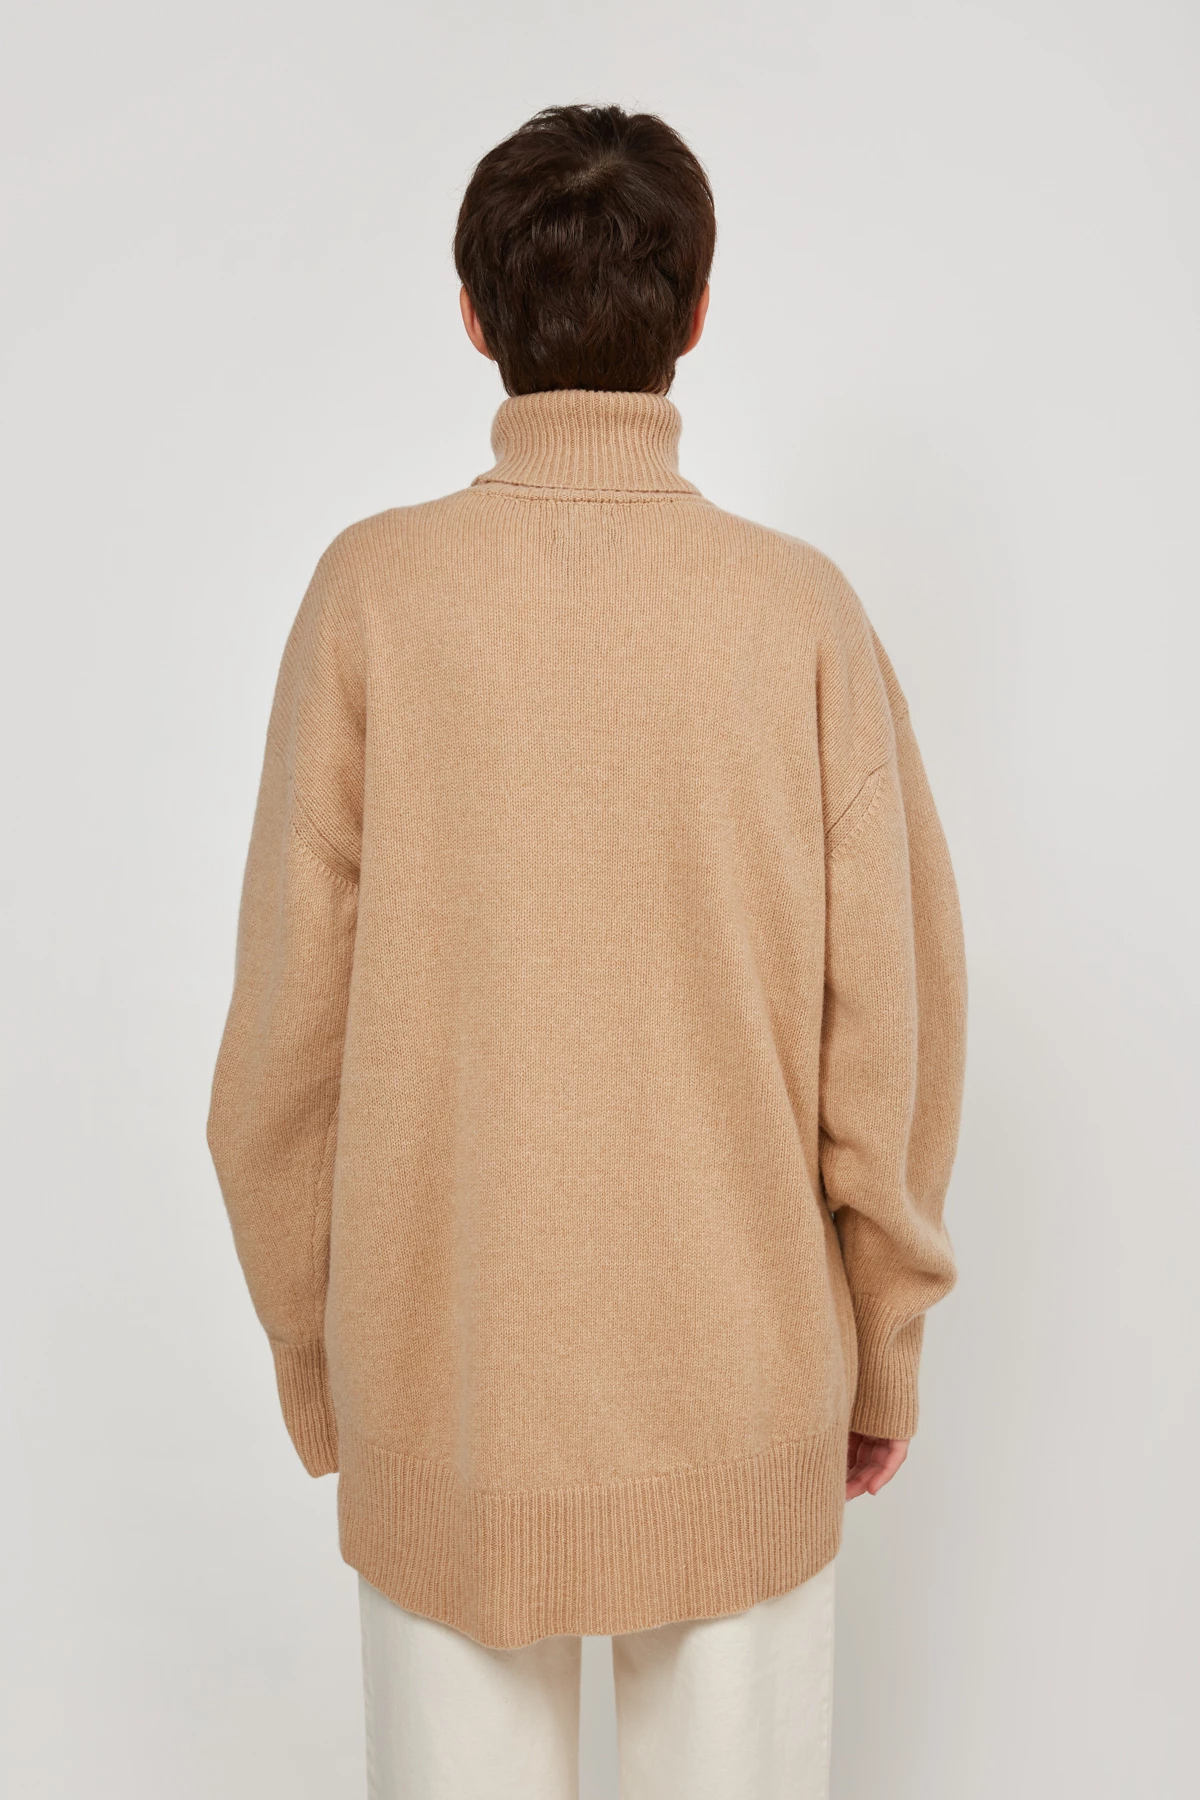 Cashmere beige knitted oversized sweater, photo 5